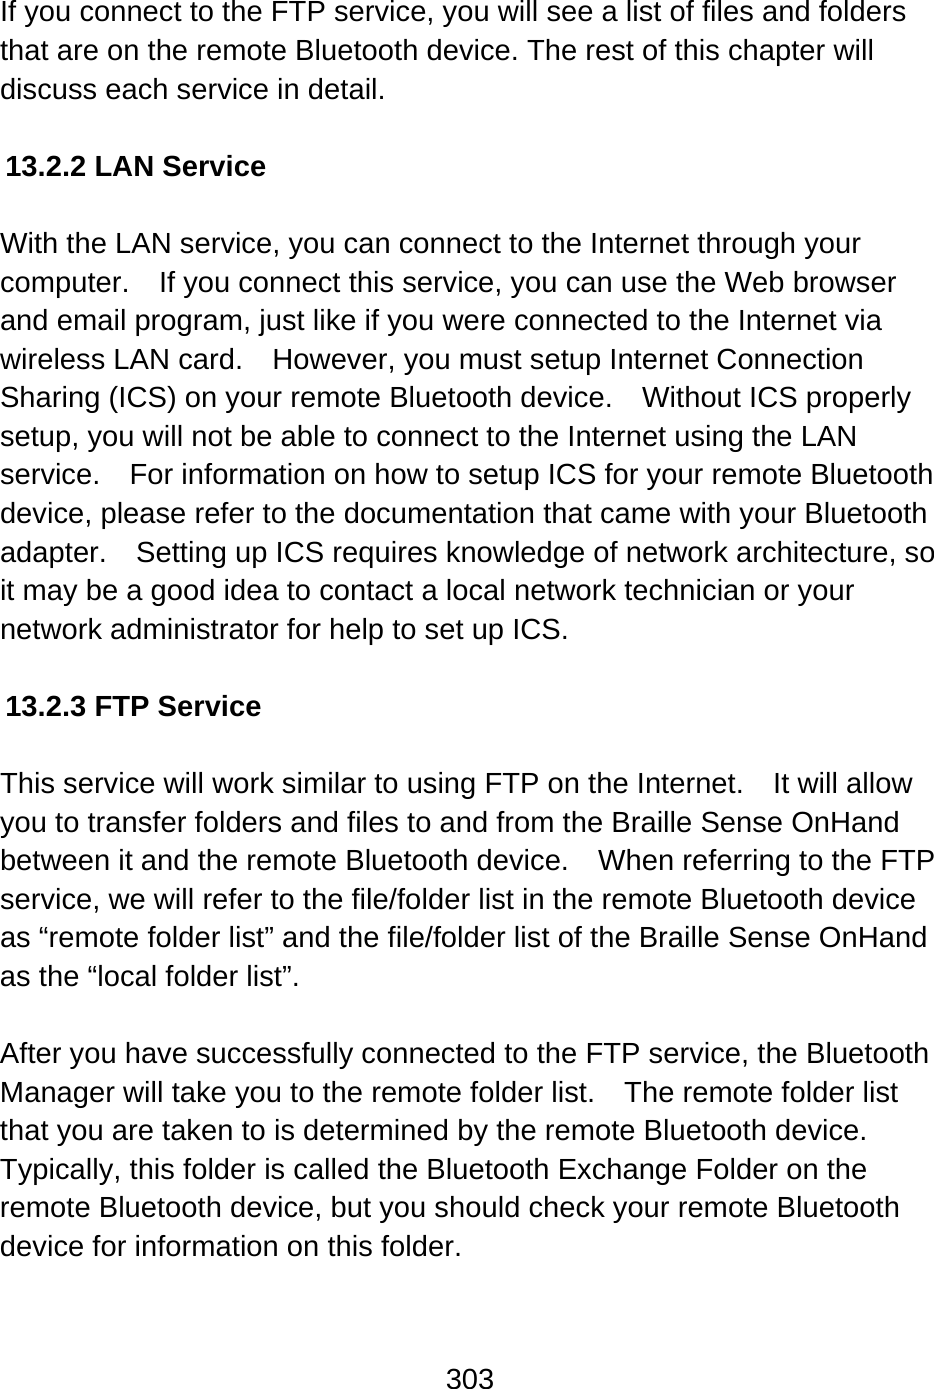 303   If you connect to the FTP service, you will see a list of files and folders that are on the remote Bluetooth device. The rest of this chapter will discuss each service in detail.  13.2.2 LAN Service  With the LAN service, you can connect to the Internet through your computer.  If you connect this service, you can use the Web browser and email program, just like if you were connected to the Internet via wireless LAN card.  However, you must setup Internet Connection Sharing (ICS) on your remote Bluetooth device.    Without ICS properly setup, you will not be able to connect to the Internet using the LAN service.    For information on how to setup ICS for your remote Bluetooth device, please refer to the documentation that came with your Bluetooth adapter.    Setting up ICS requires knowledge of network architecture, so it may be a good idea to contact a local network technician or your network administrator for help to set up ICS.  13.2.3 FTP Service  This service will work similar to using FTP on the Internet.    It will allow you to transfer folders and files to and from the Braille Sense OnHand between it and the remote Bluetooth device.    When referring to the FTP service, we will refer to the file/folder list in the remote Bluetooth device as “remote folder list” and the file/folder list of the Braille Sense OnHand as the “local folder list”.  After you have successfully connected to the FTP service, the Bluetooth Manager will take you to the remote folder list.    The remote folder list that you are taken to is determined by the remote Bluetooth device.   Typically, this folder is called the Bluetooth Exchange Folder on the remote Bluetooth device, but you should check your remote Bluetooth device for information on this folder.  